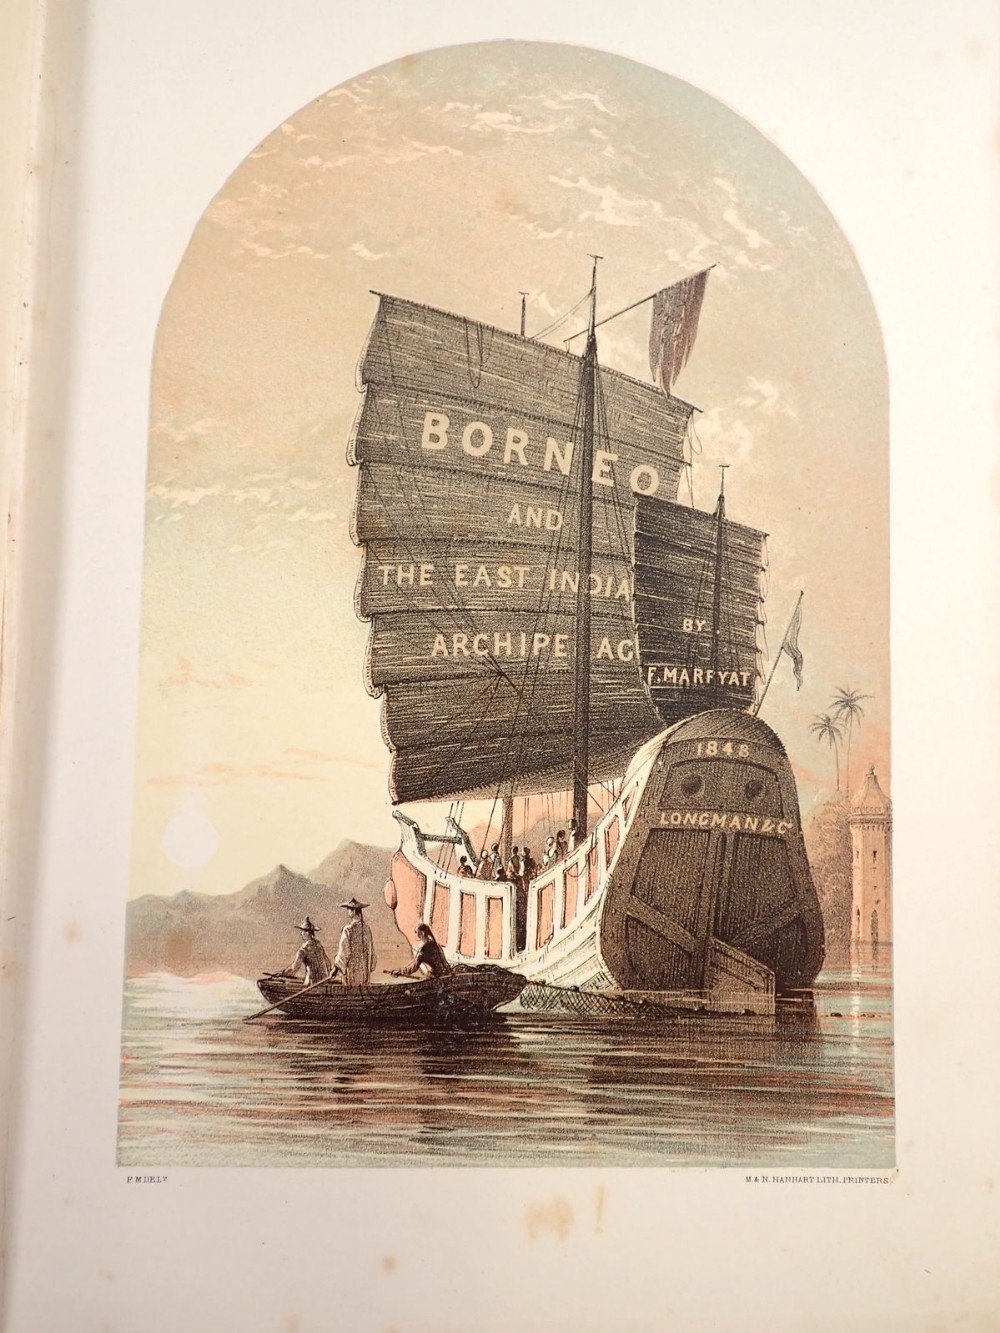 Borneo and The Indian Archipelago by Frank S Marryat, published Longman Brown, Green & Longmans 1848 - Image 2 of 4